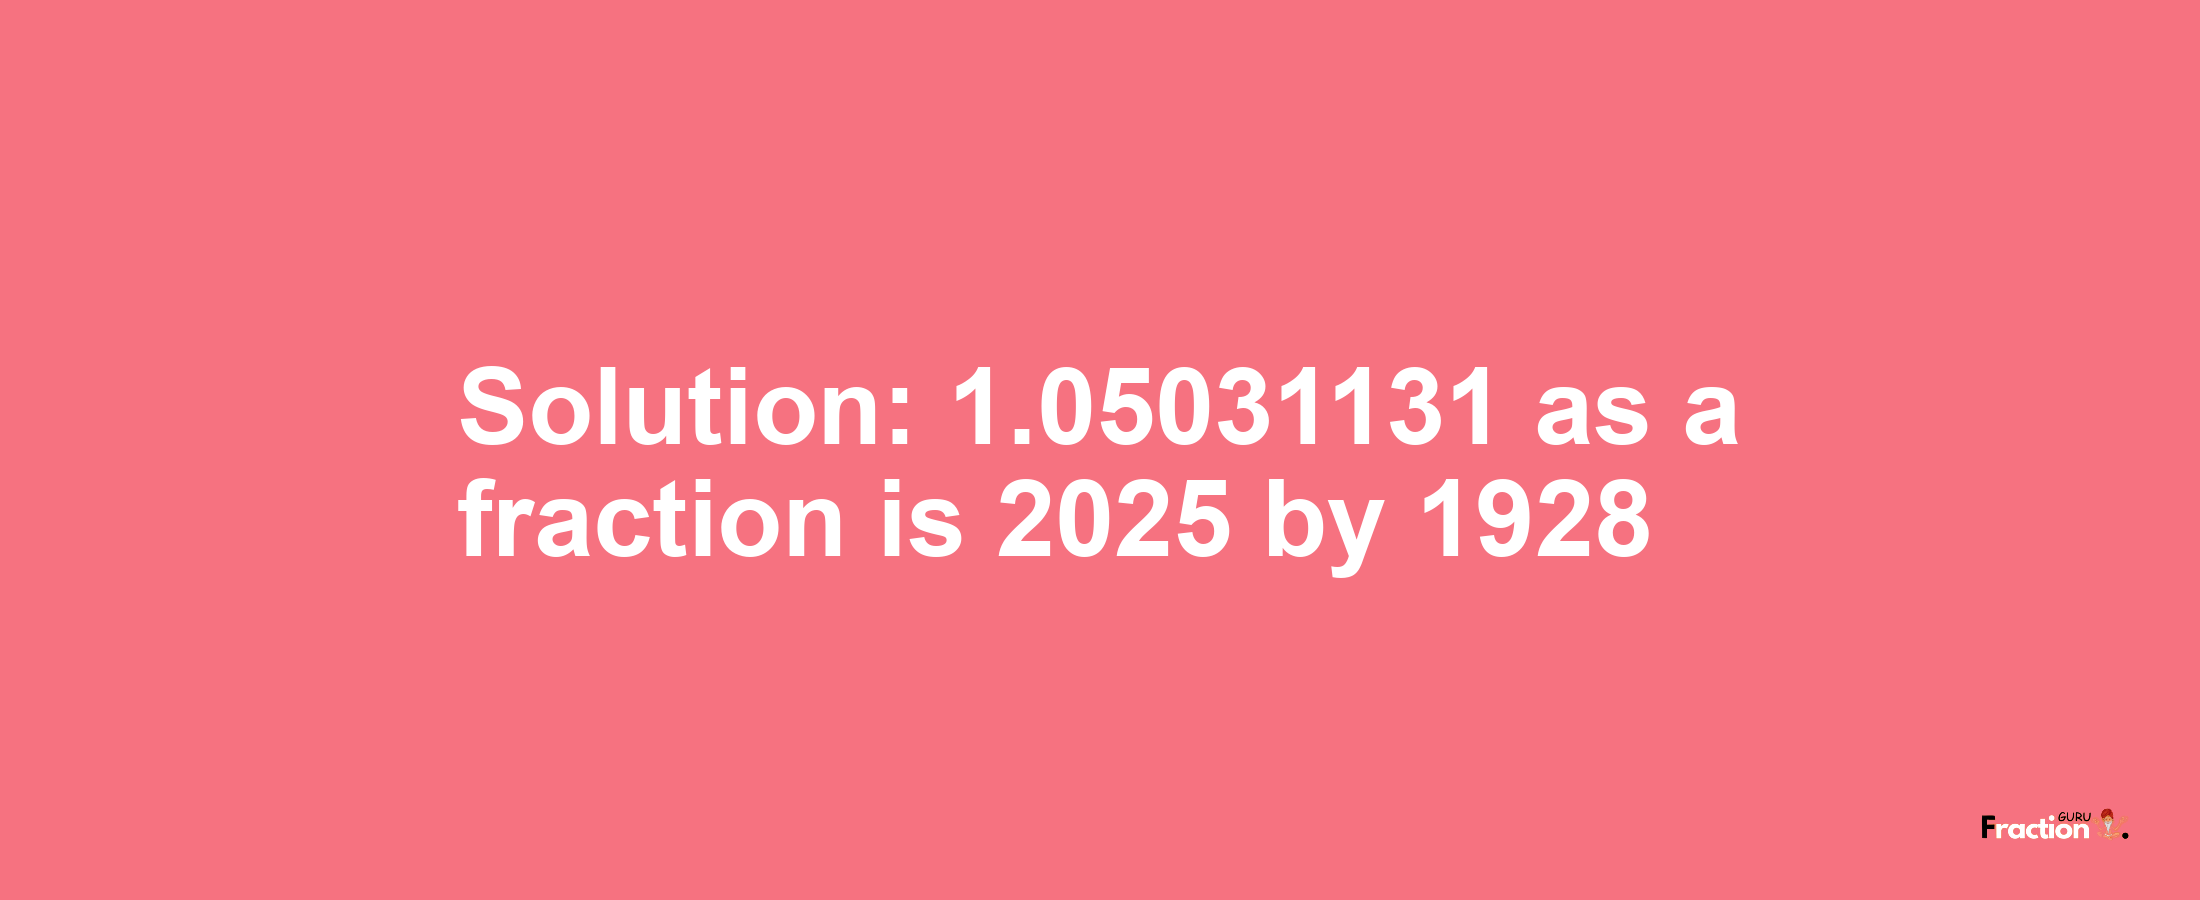 Solution:1.05031131 as a fraction is 2025/1928